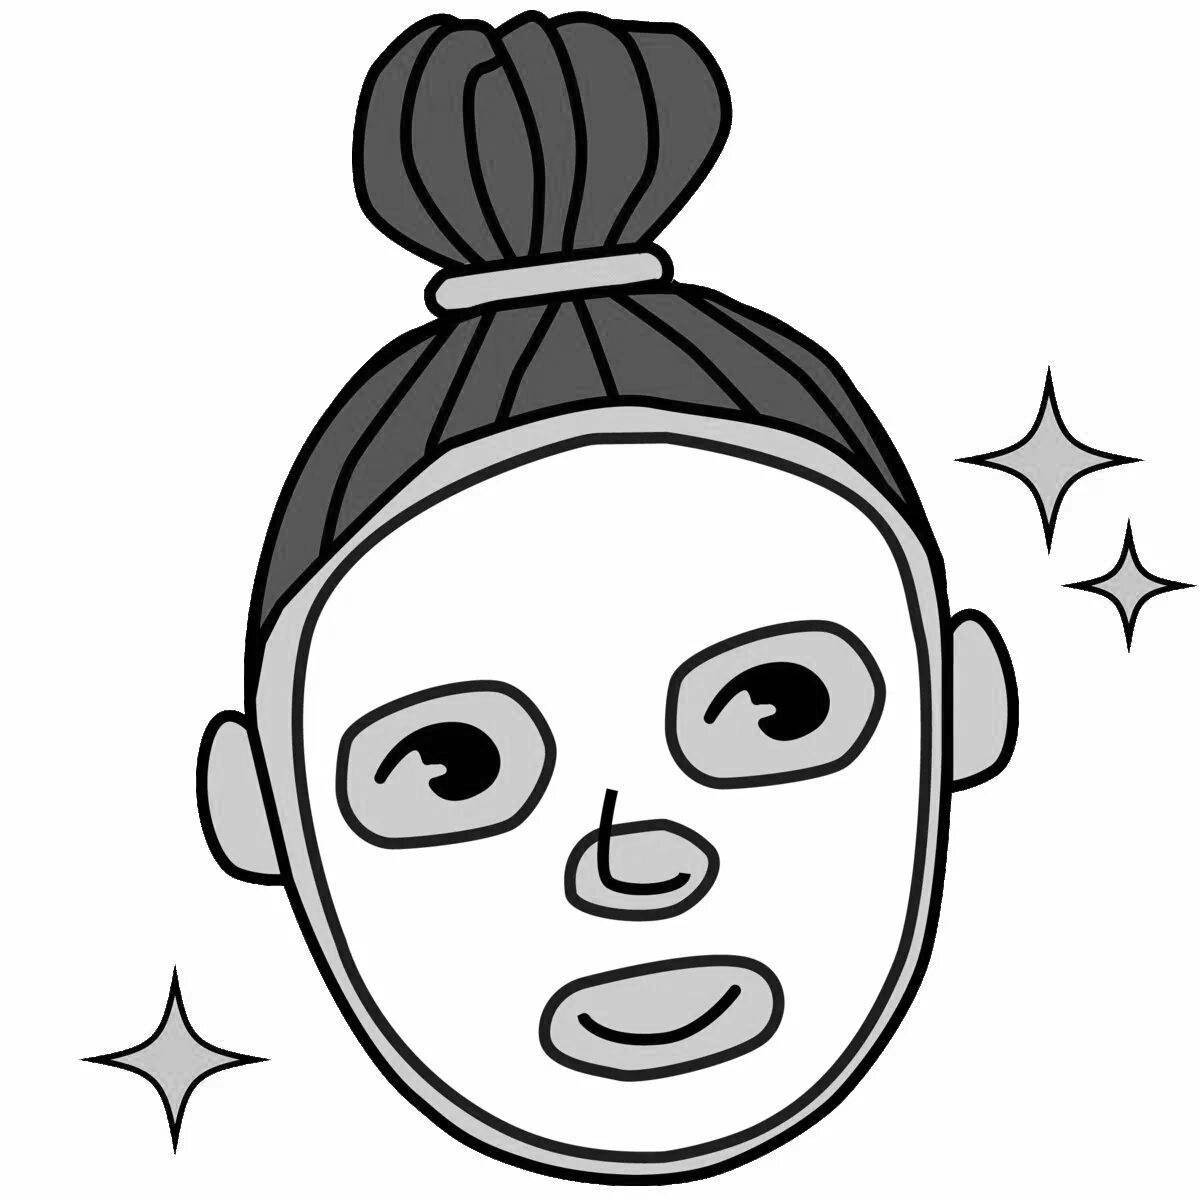 Coloring sheet bright fabric face mask